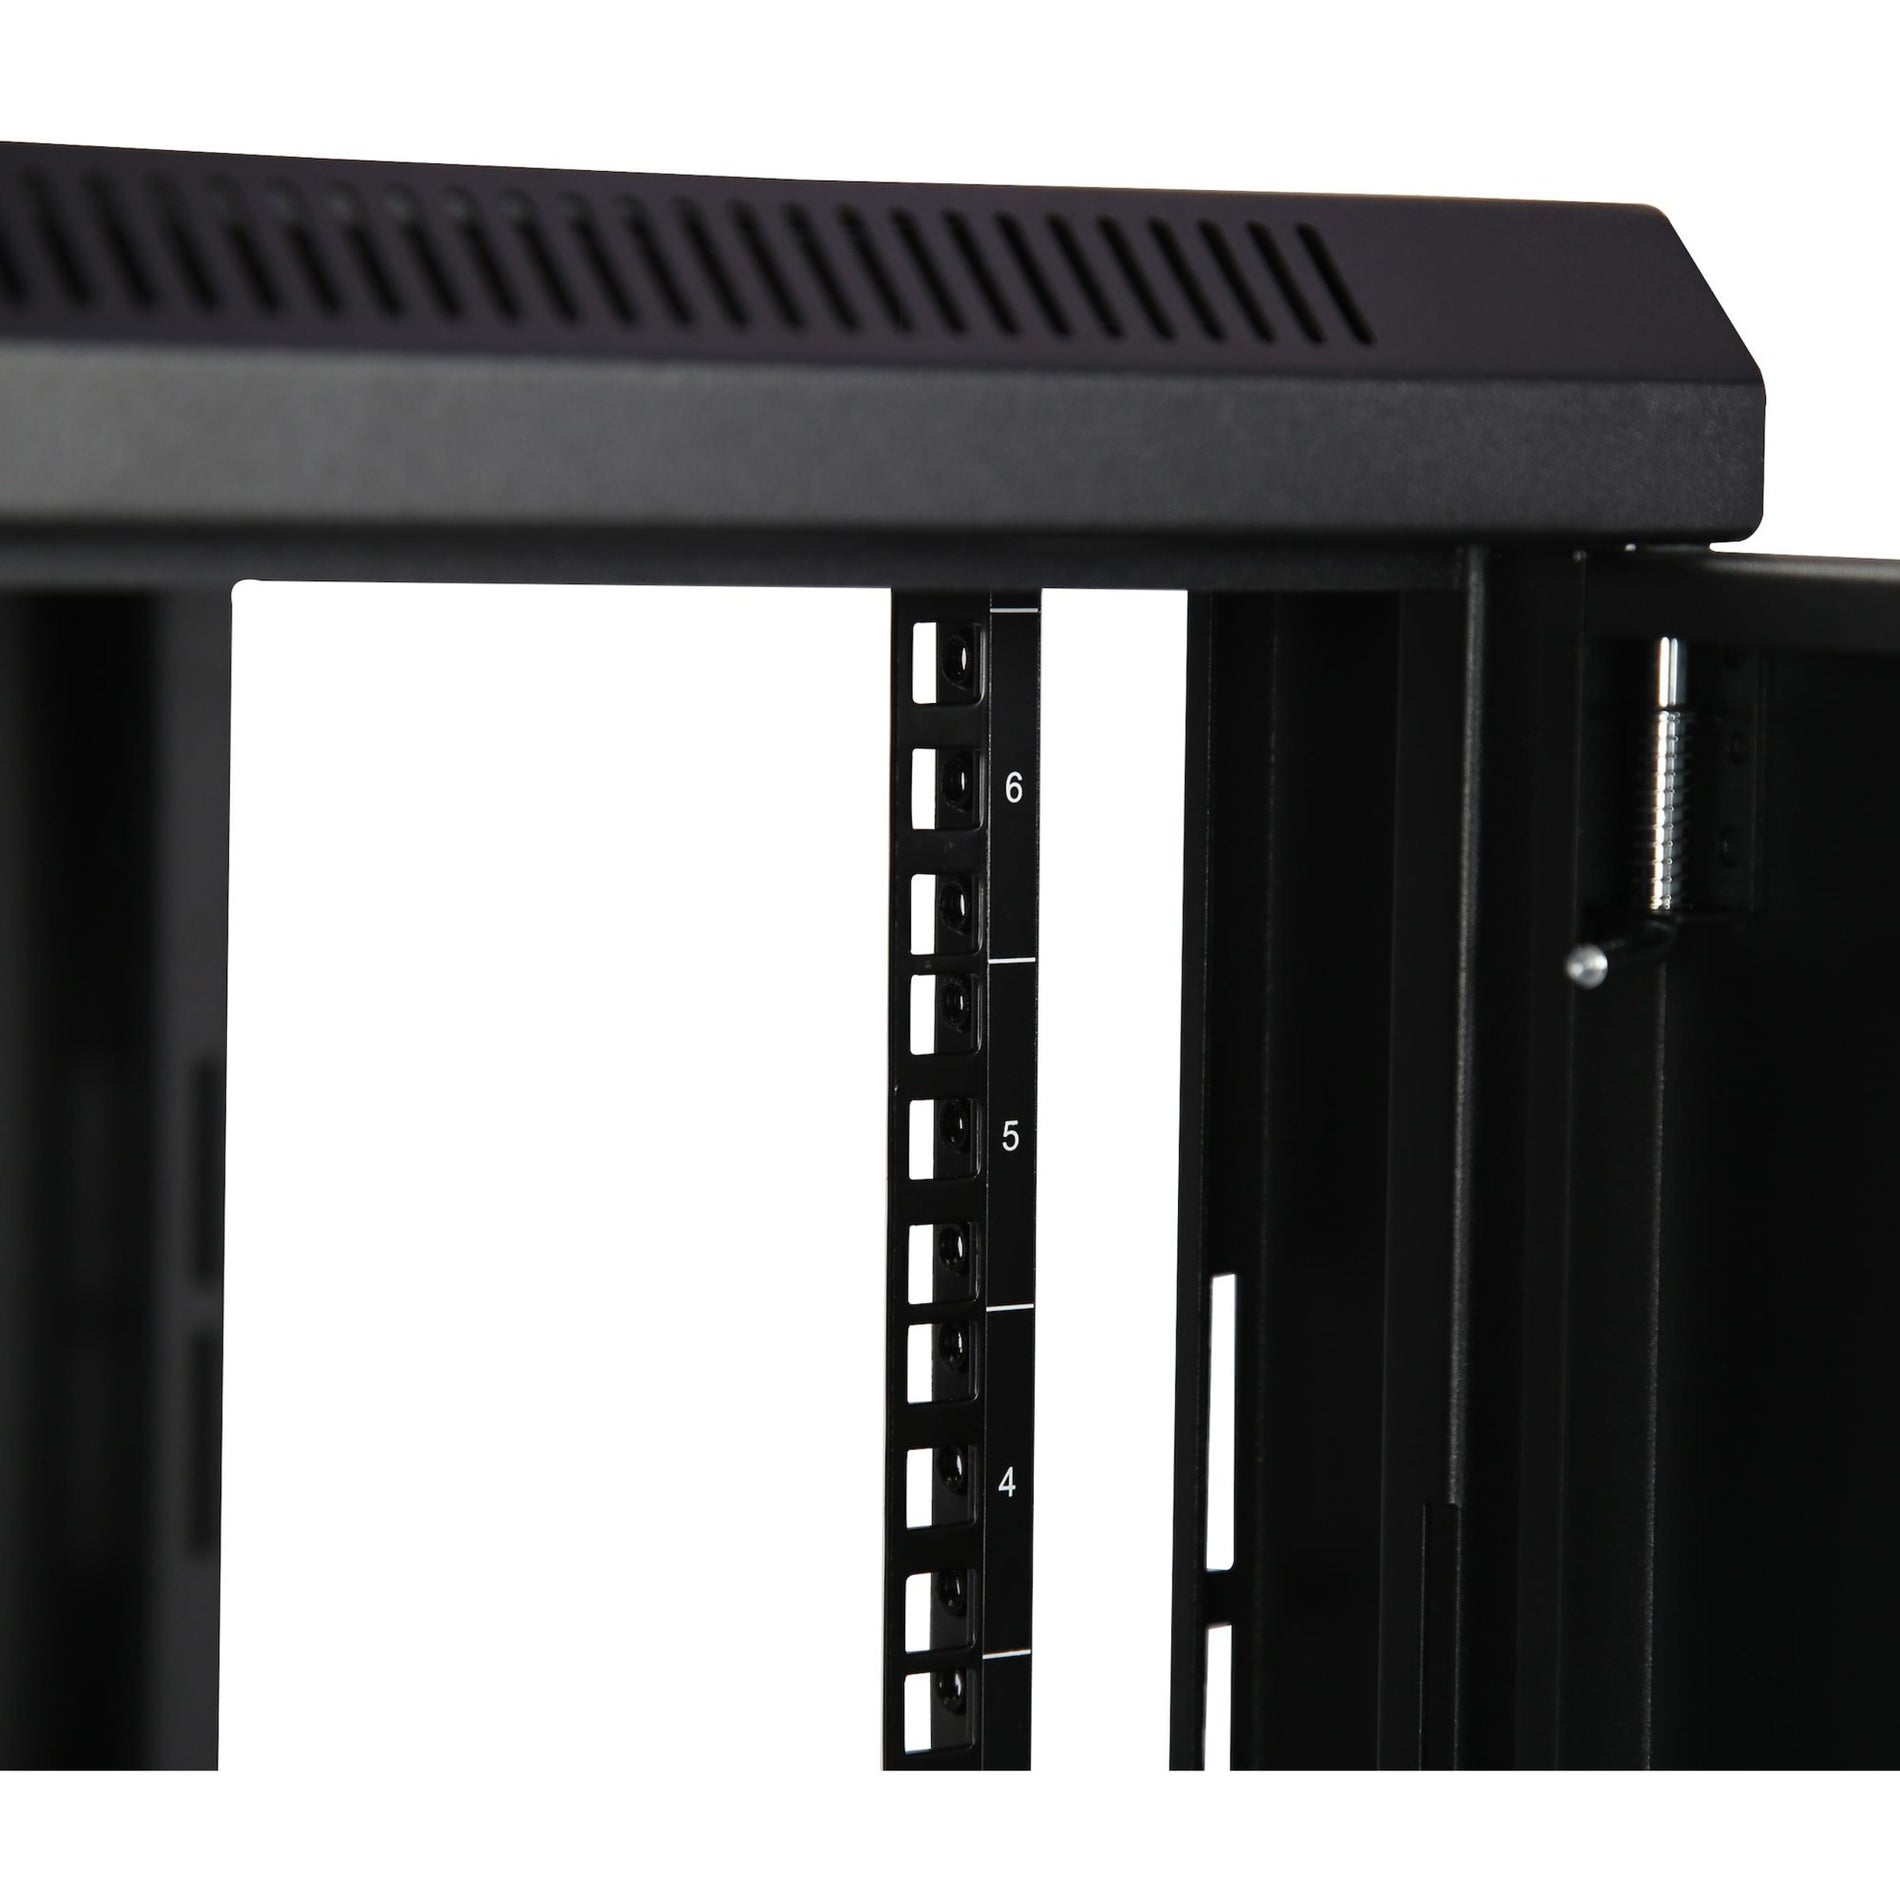 StarTech.com RK616WALM 6U Wall-Mount Server Rack Cabinet - Up to 16.9 in. Deep, Vented, Cable Management, Adjustable Mounting Rails